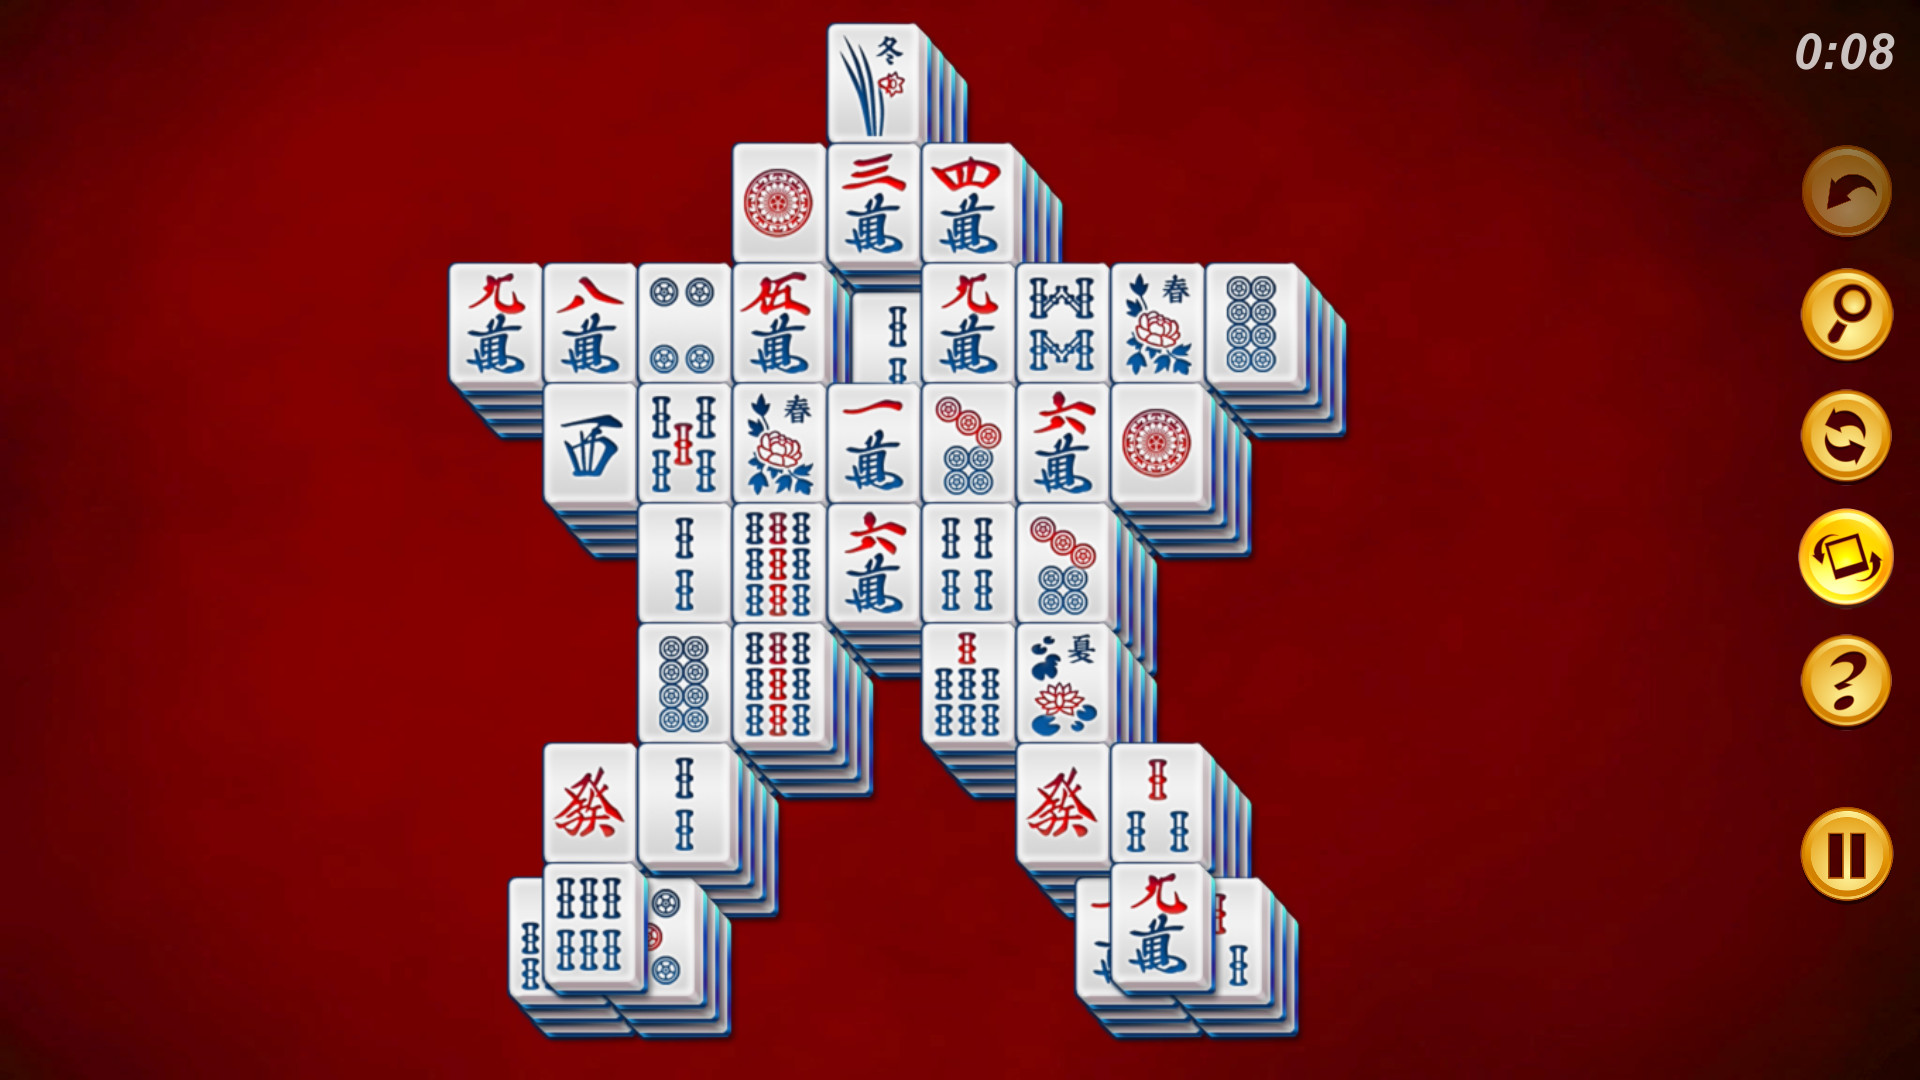 Mahjong Solitaire Refresh on Steam